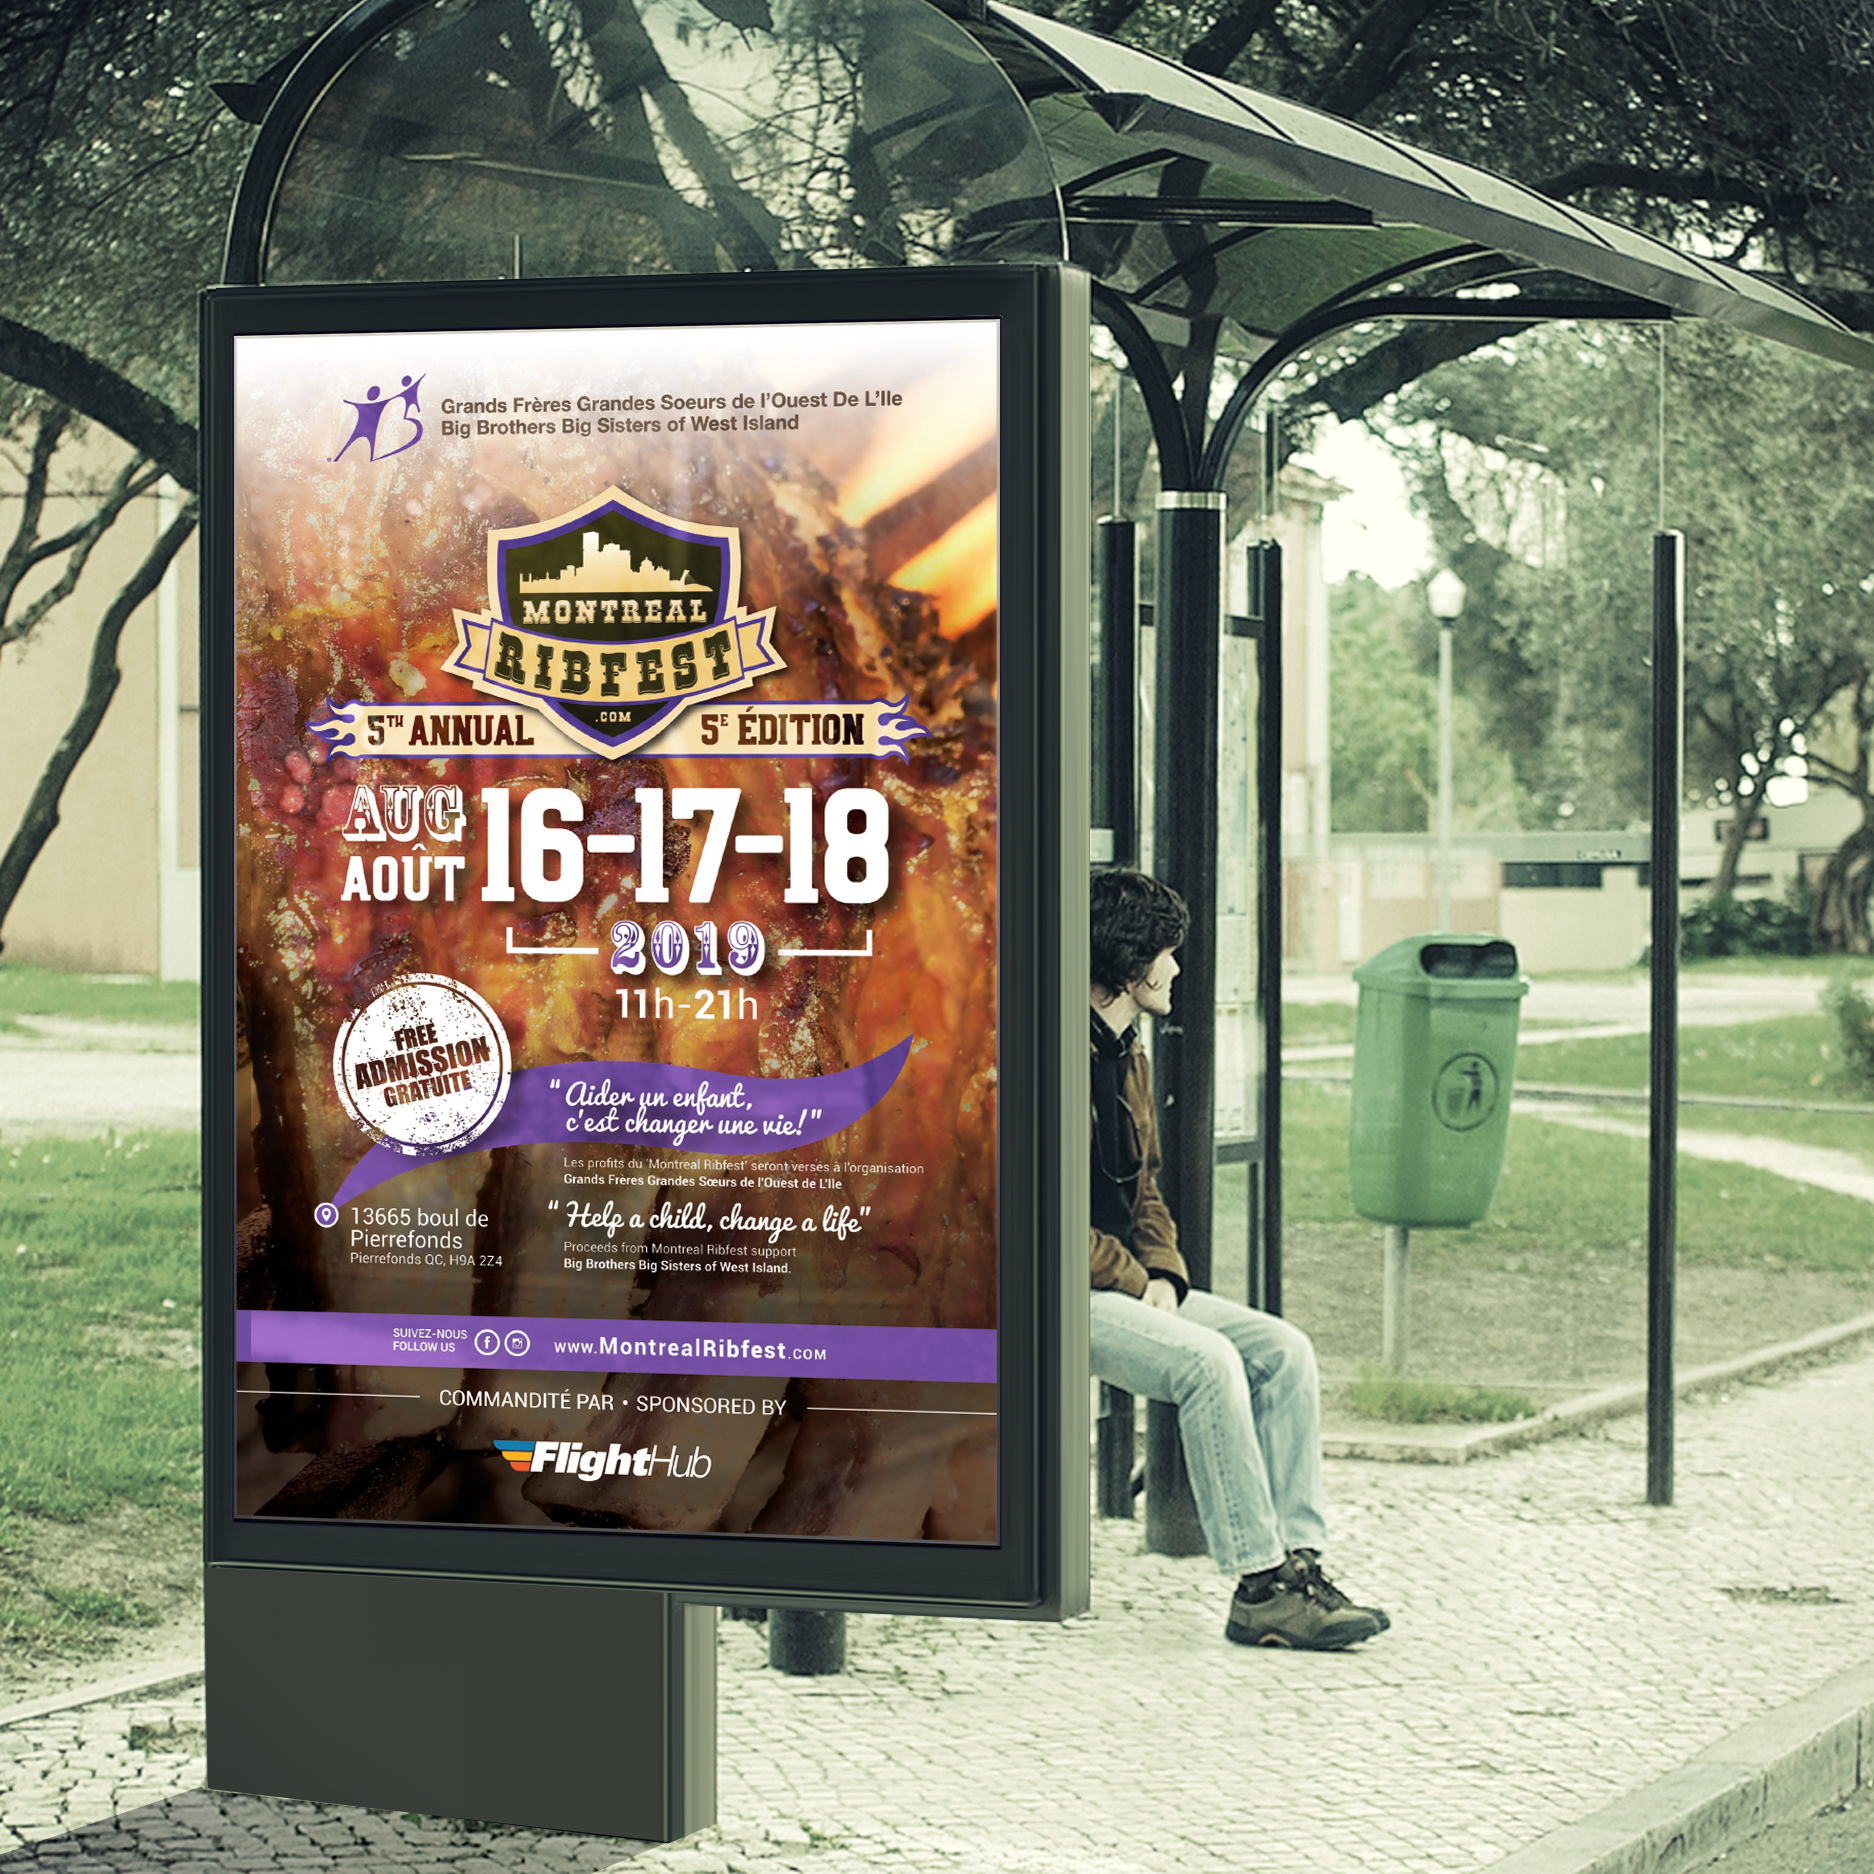 Montreal's West Island Ribfest 2019 advertisement at bus stop.